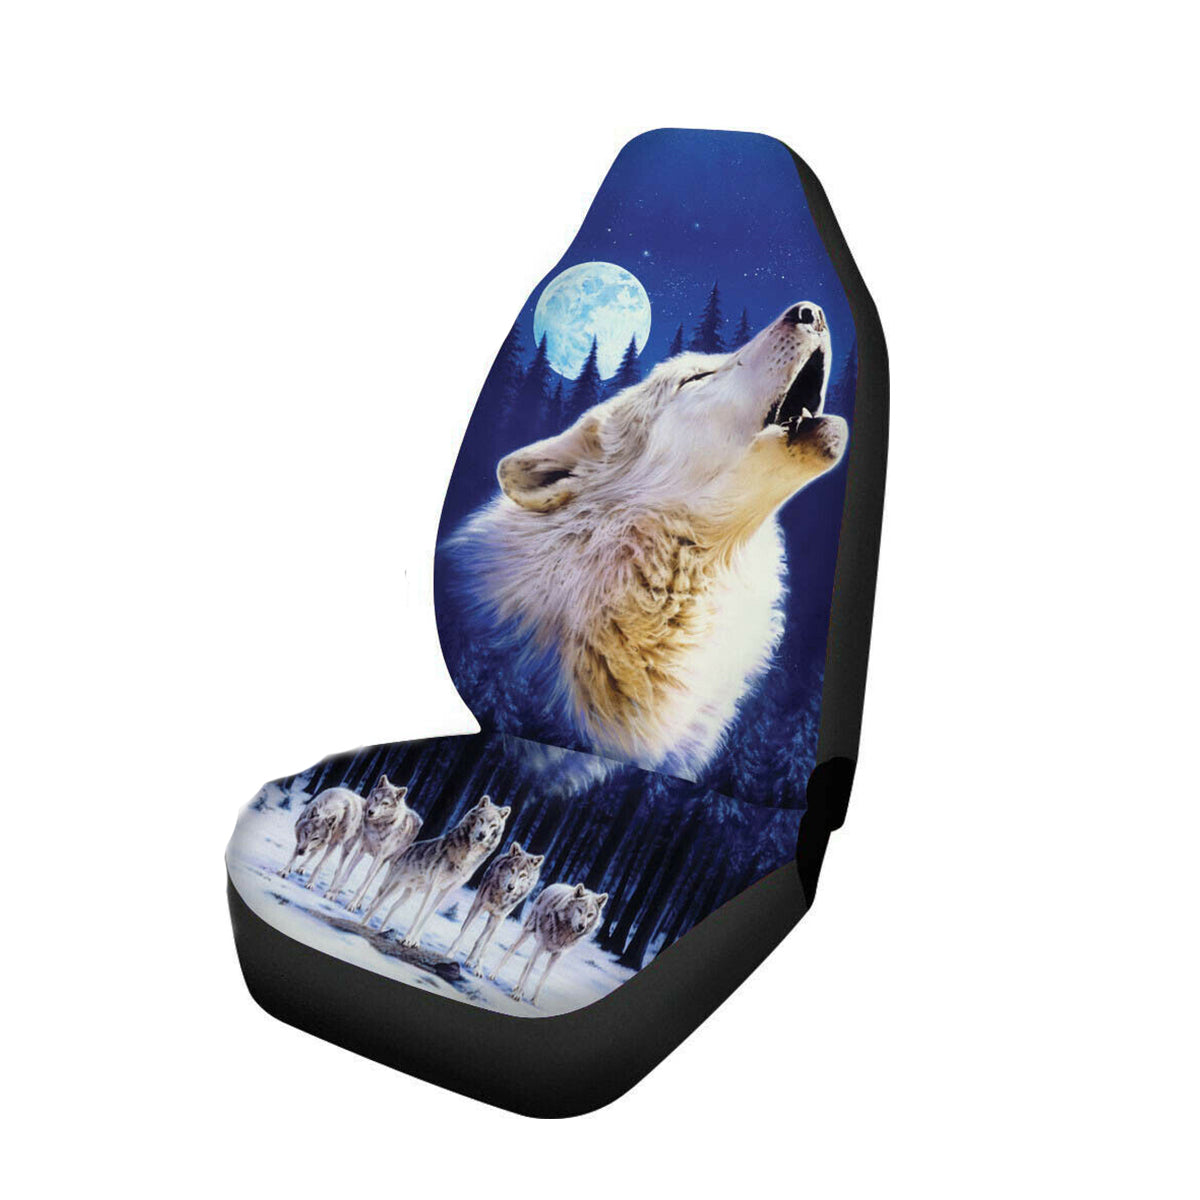 1PCS Single Seat Car Front Seat Cover Protector Universal Cushion Animal Printed - Auto GoShop